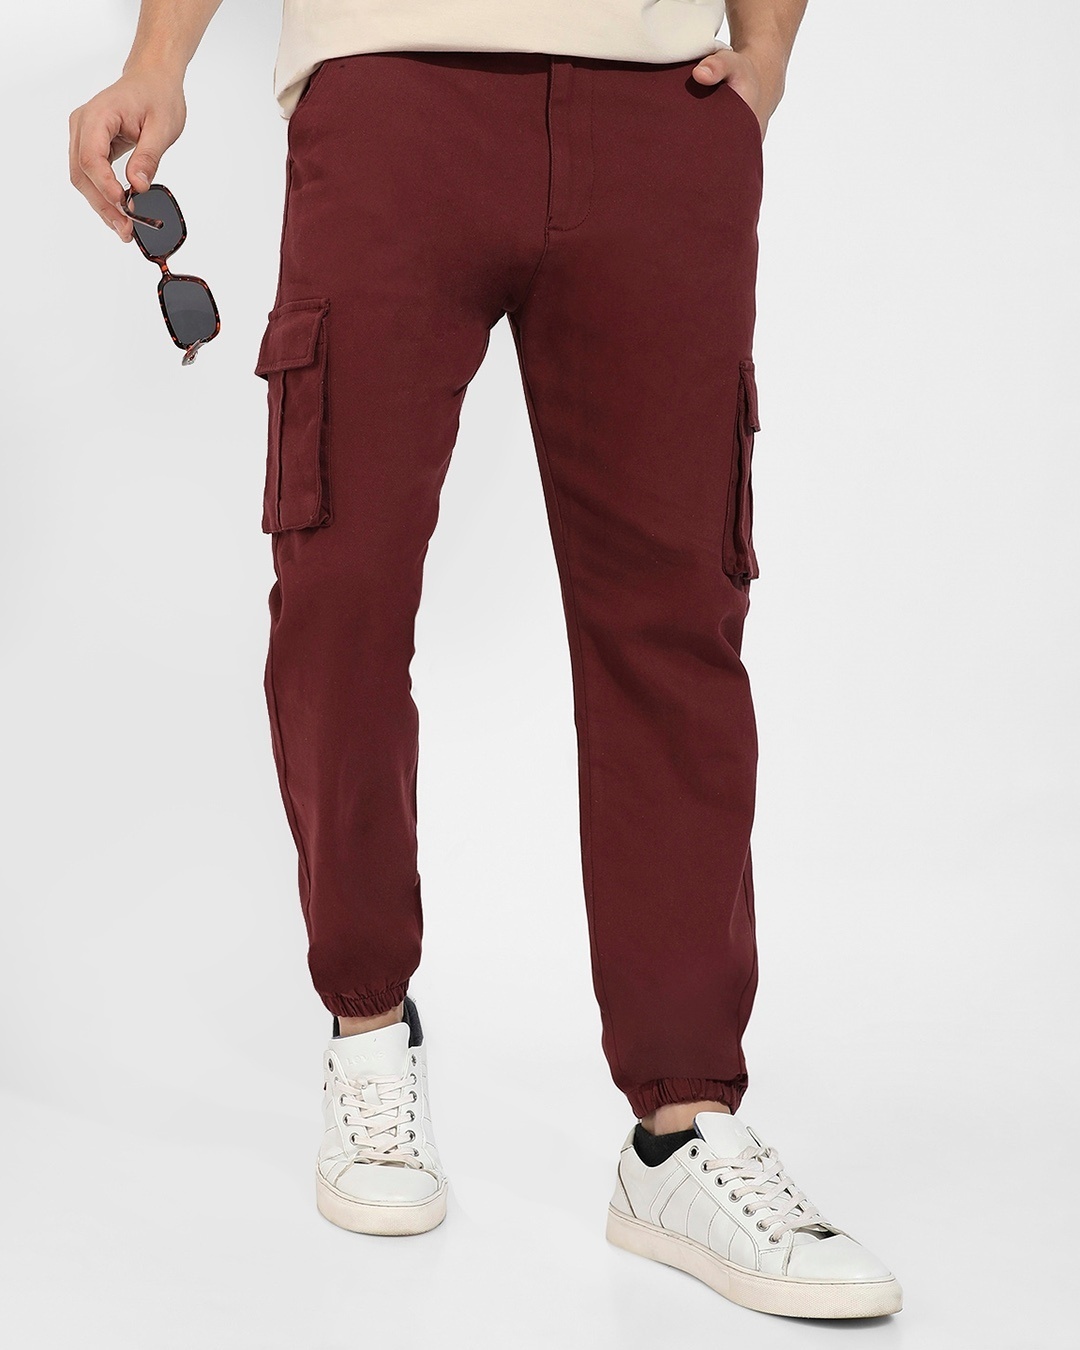 Hot Topic Burgundy Contrast Stitch Girls Cargo Pants | CoolSprings Galleria